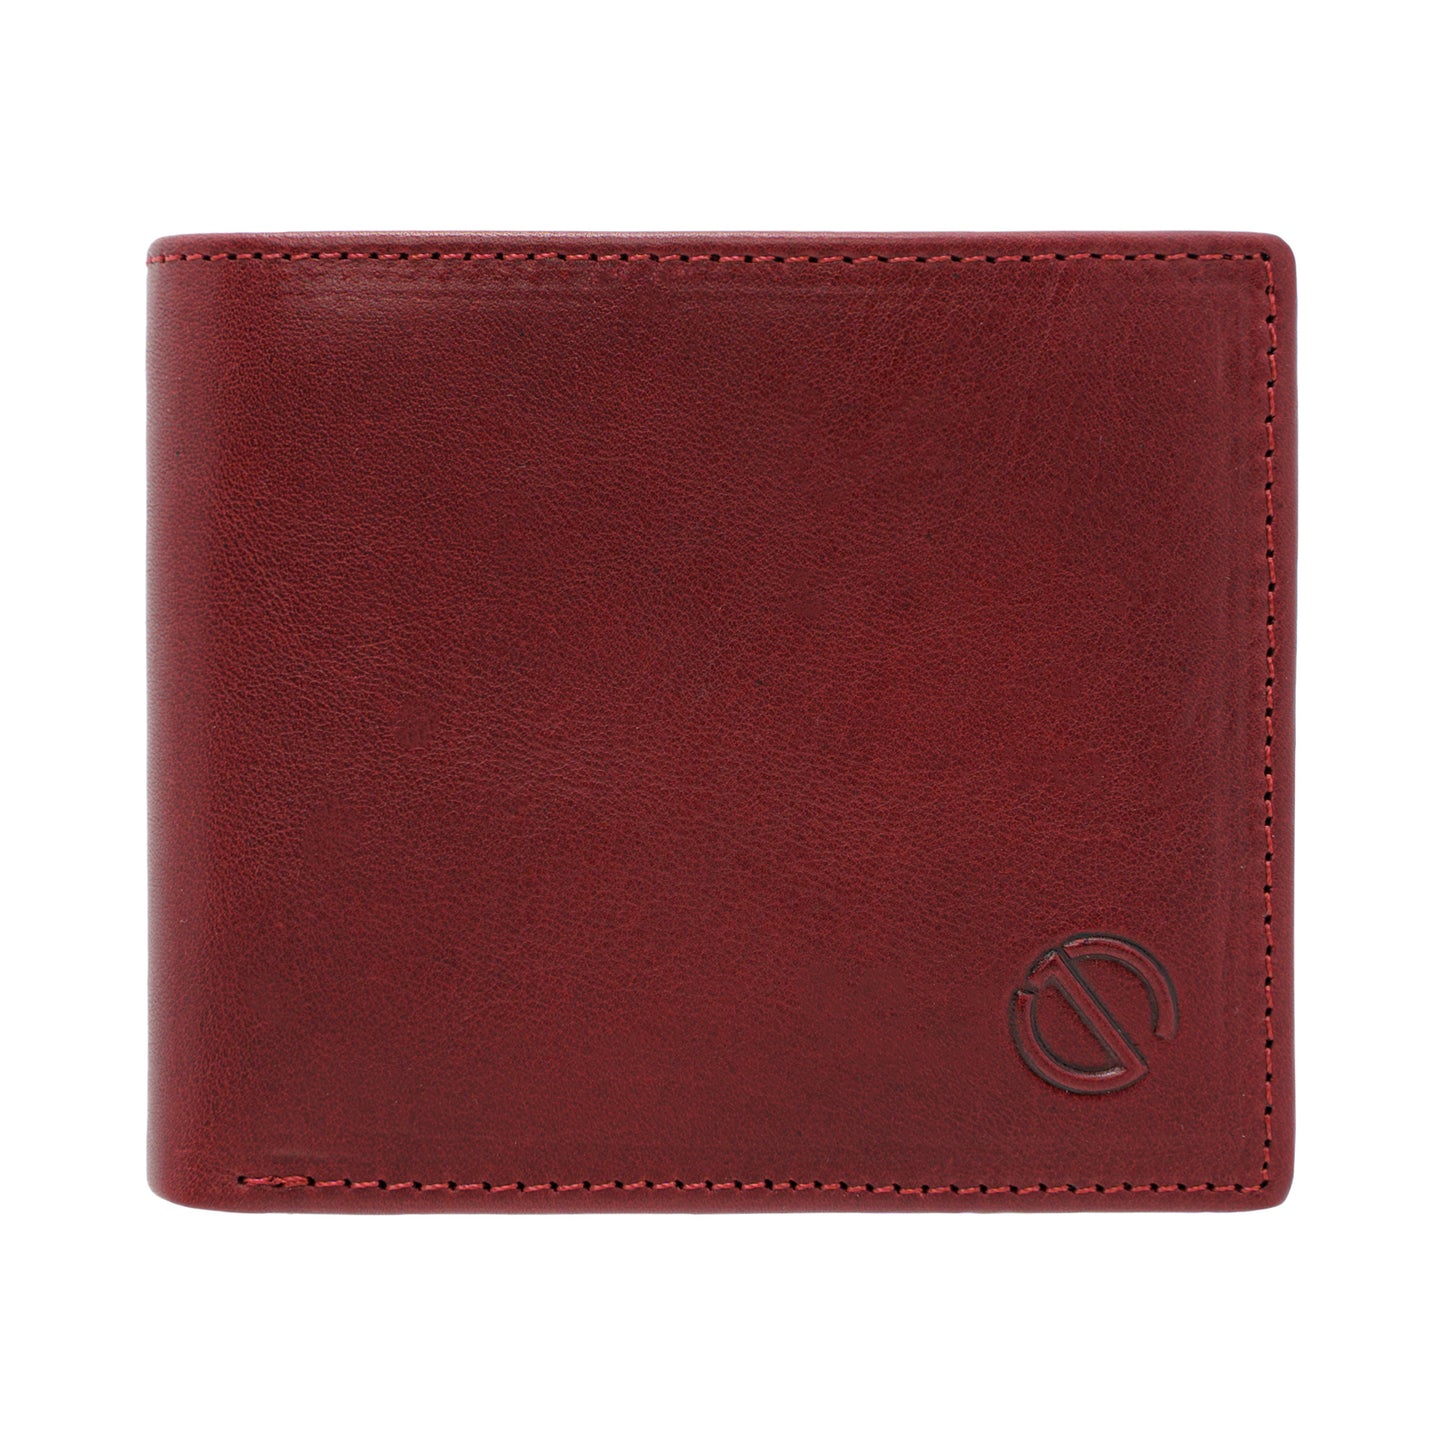 Jack Studio Vegetable Tanned Cow Leather Magnetic Closure Bifold Men’s Wallet with Money Clip - JWC 30861